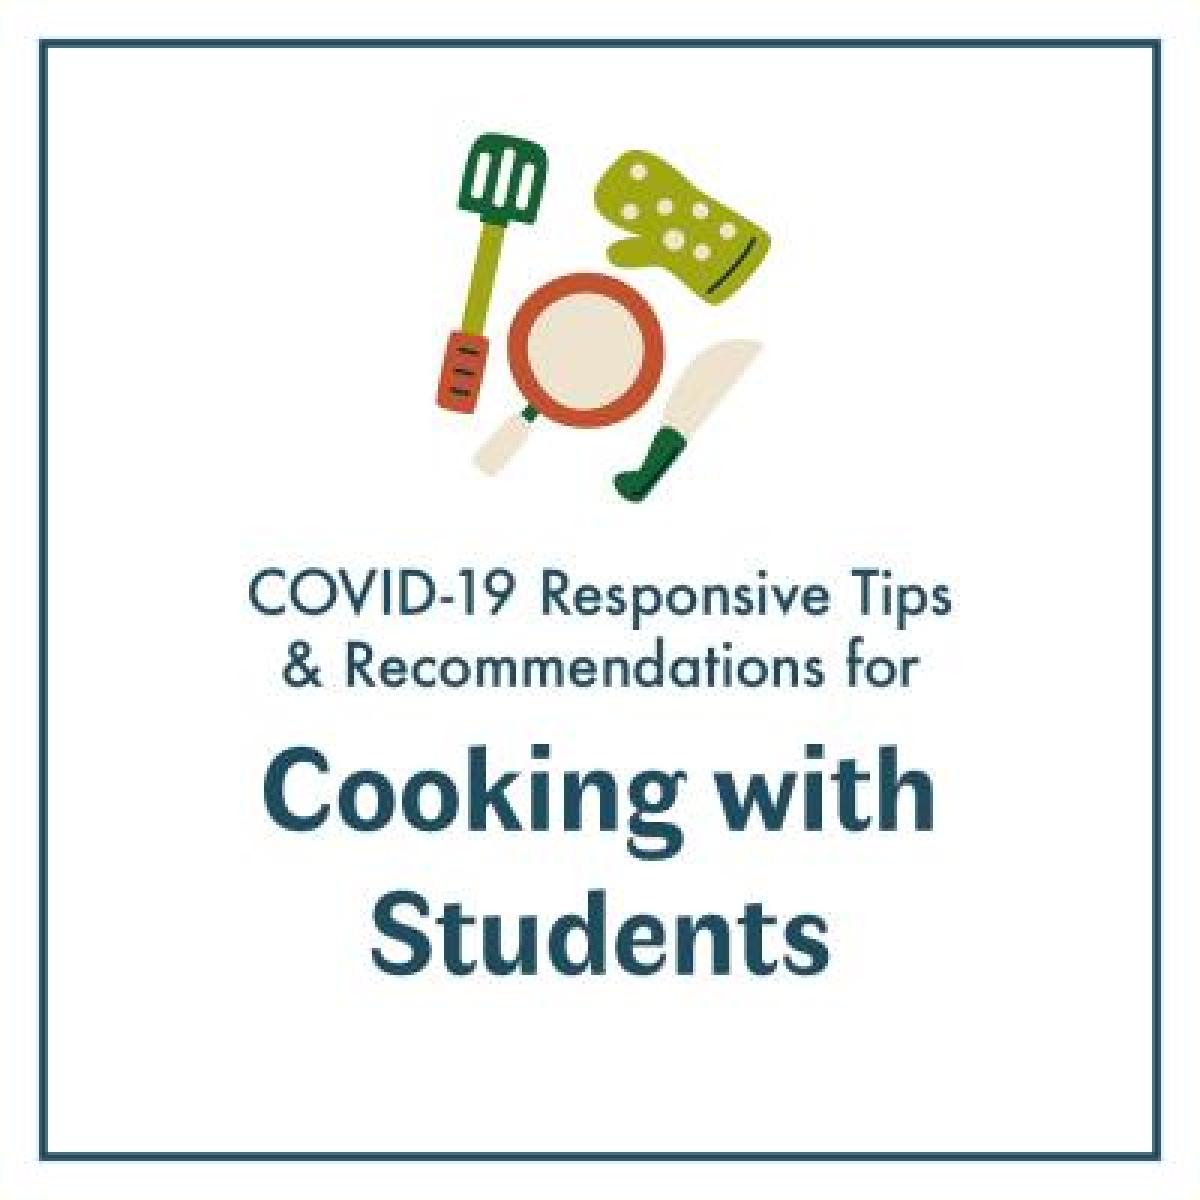 COVID-19 Responsive Tips & Recommendations for Cooking with Students